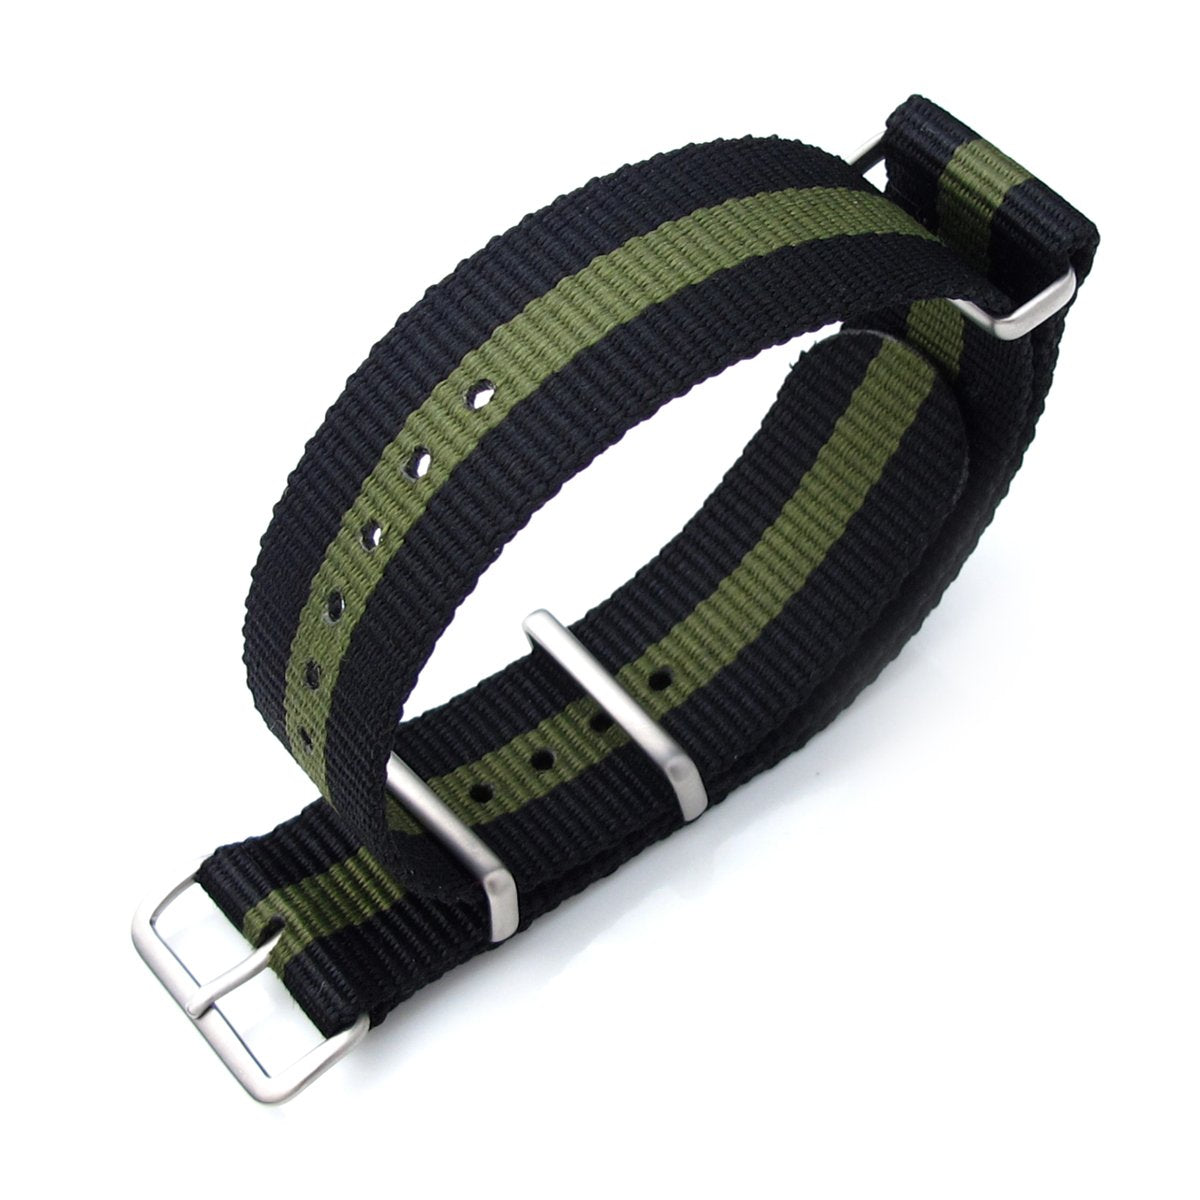 MiLTAT 20mm, 21mm or 22mm G10 NATO Military Watch Strap